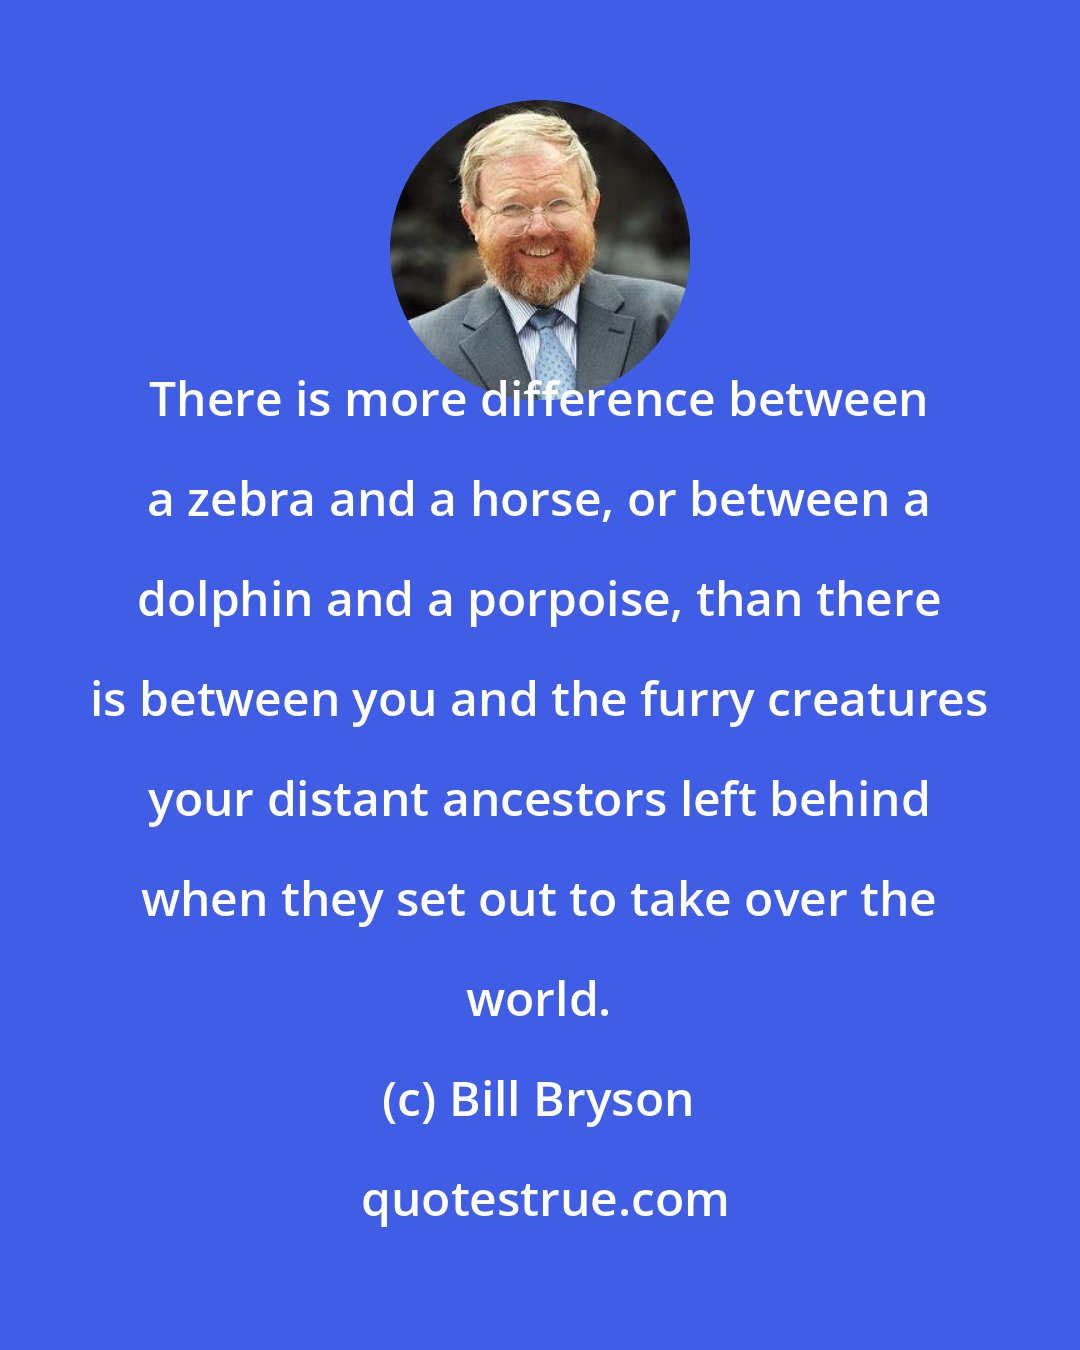 Bill Bryson: There is more difference between a zebra and a horse, or between a dolphin and a porpoise, than there is between you and the furry creatures your distant ancestors left behind when they set out to take over the world.